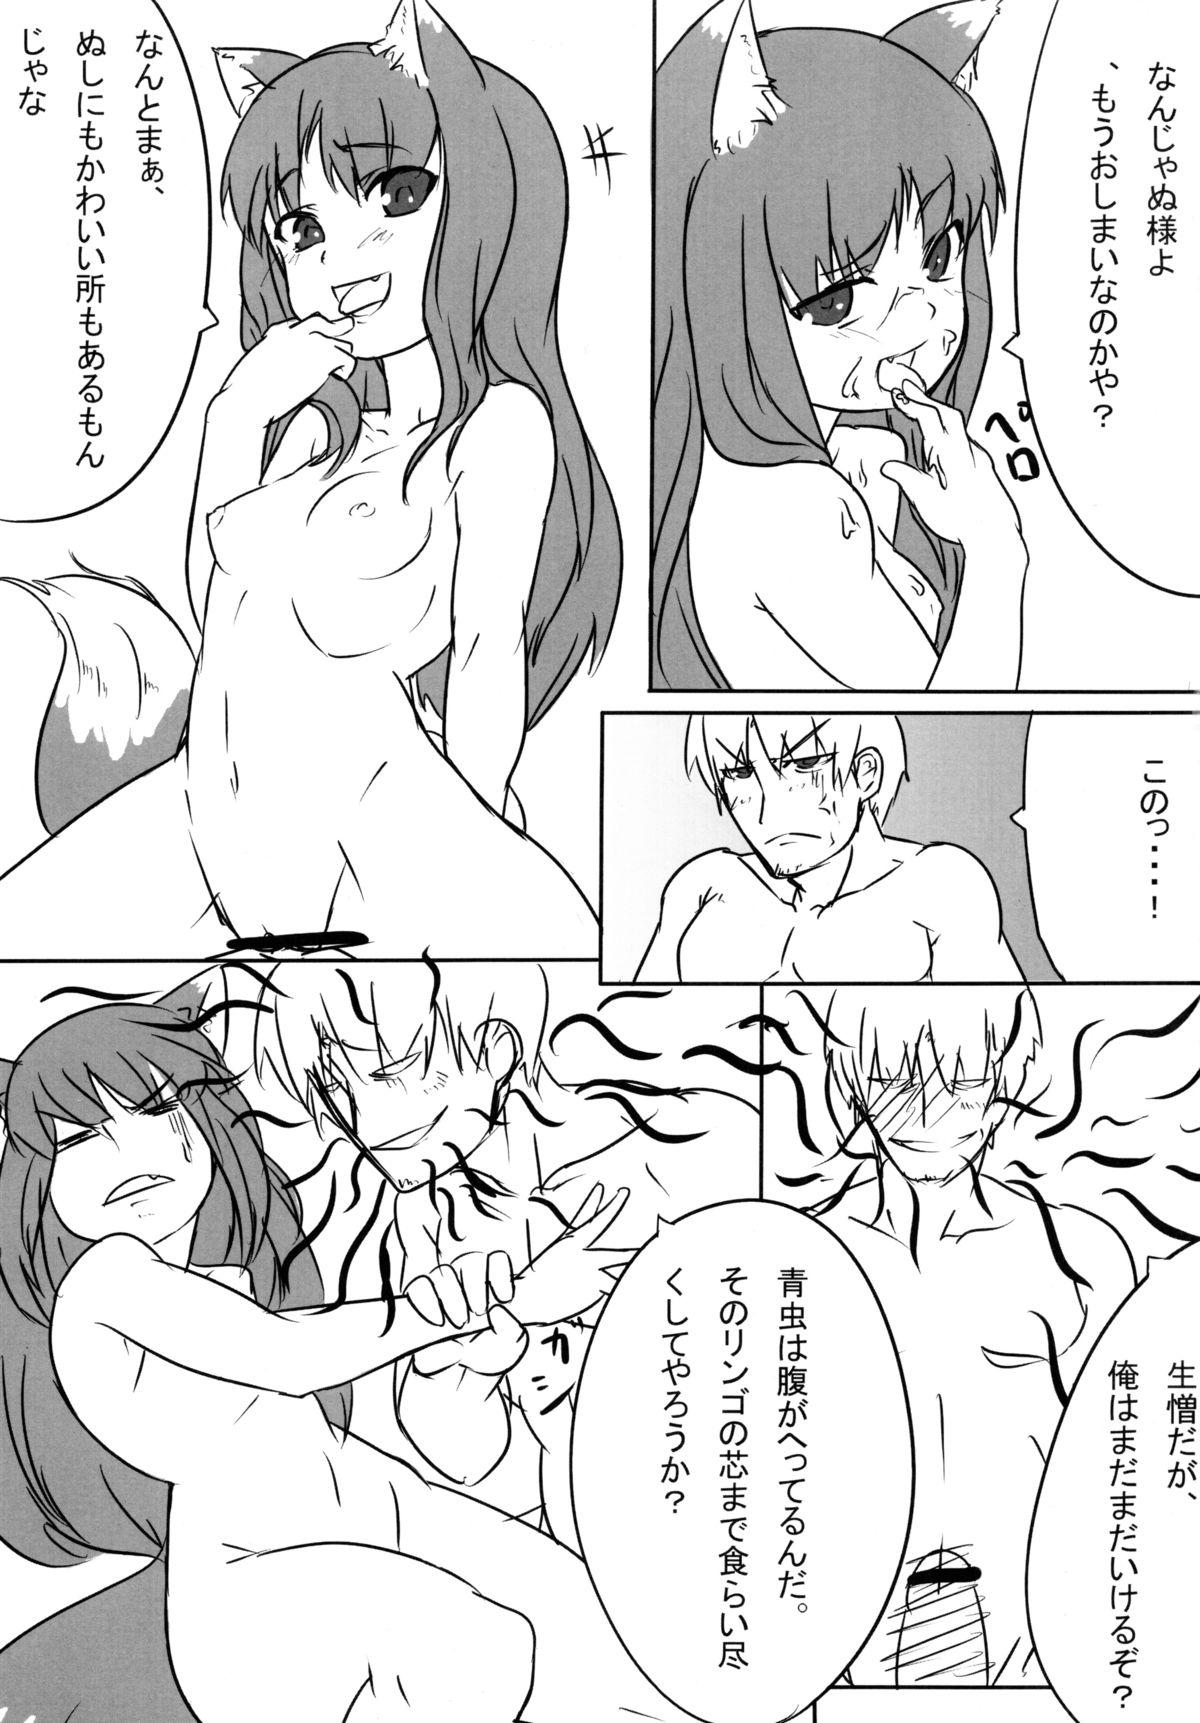 Underwear Ookamito Koushinryou IIKB - Spice and wolf Cougar - Page 11